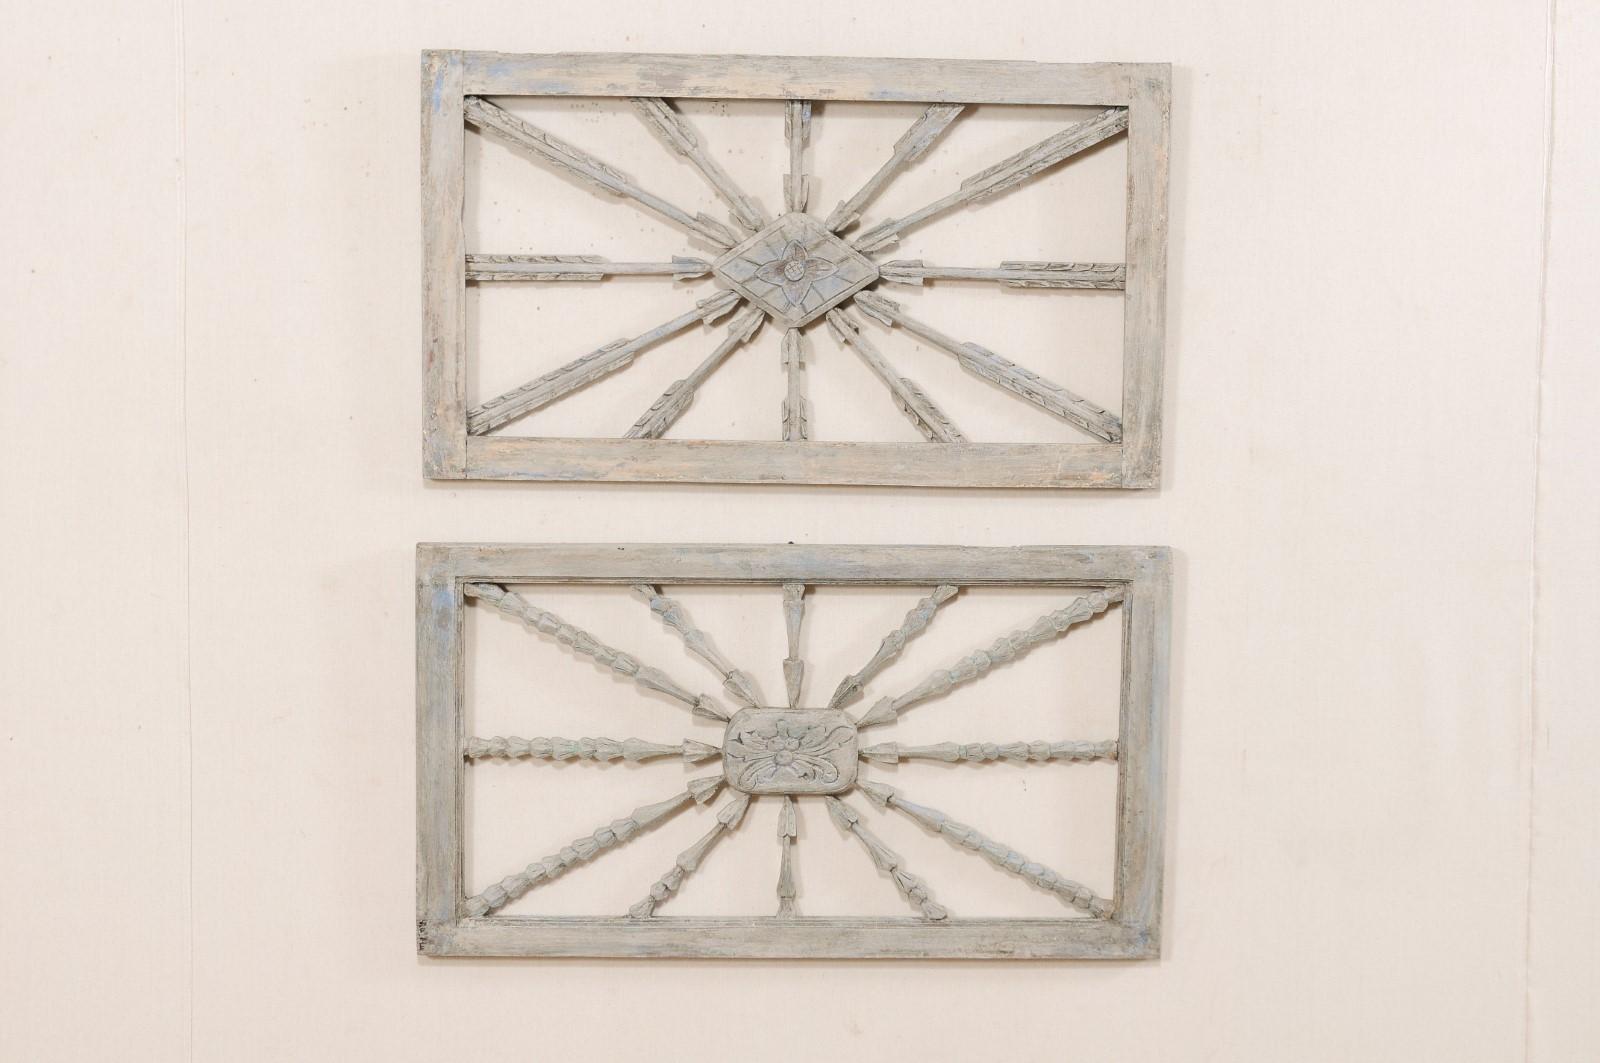 A near-pair of carved and painted wood window transoms from the early 20th century. This pair of antique window transoms have a clean, rectangular shaped surround, with nice display of carved-wood arrows pointing inward along all sides, to a center